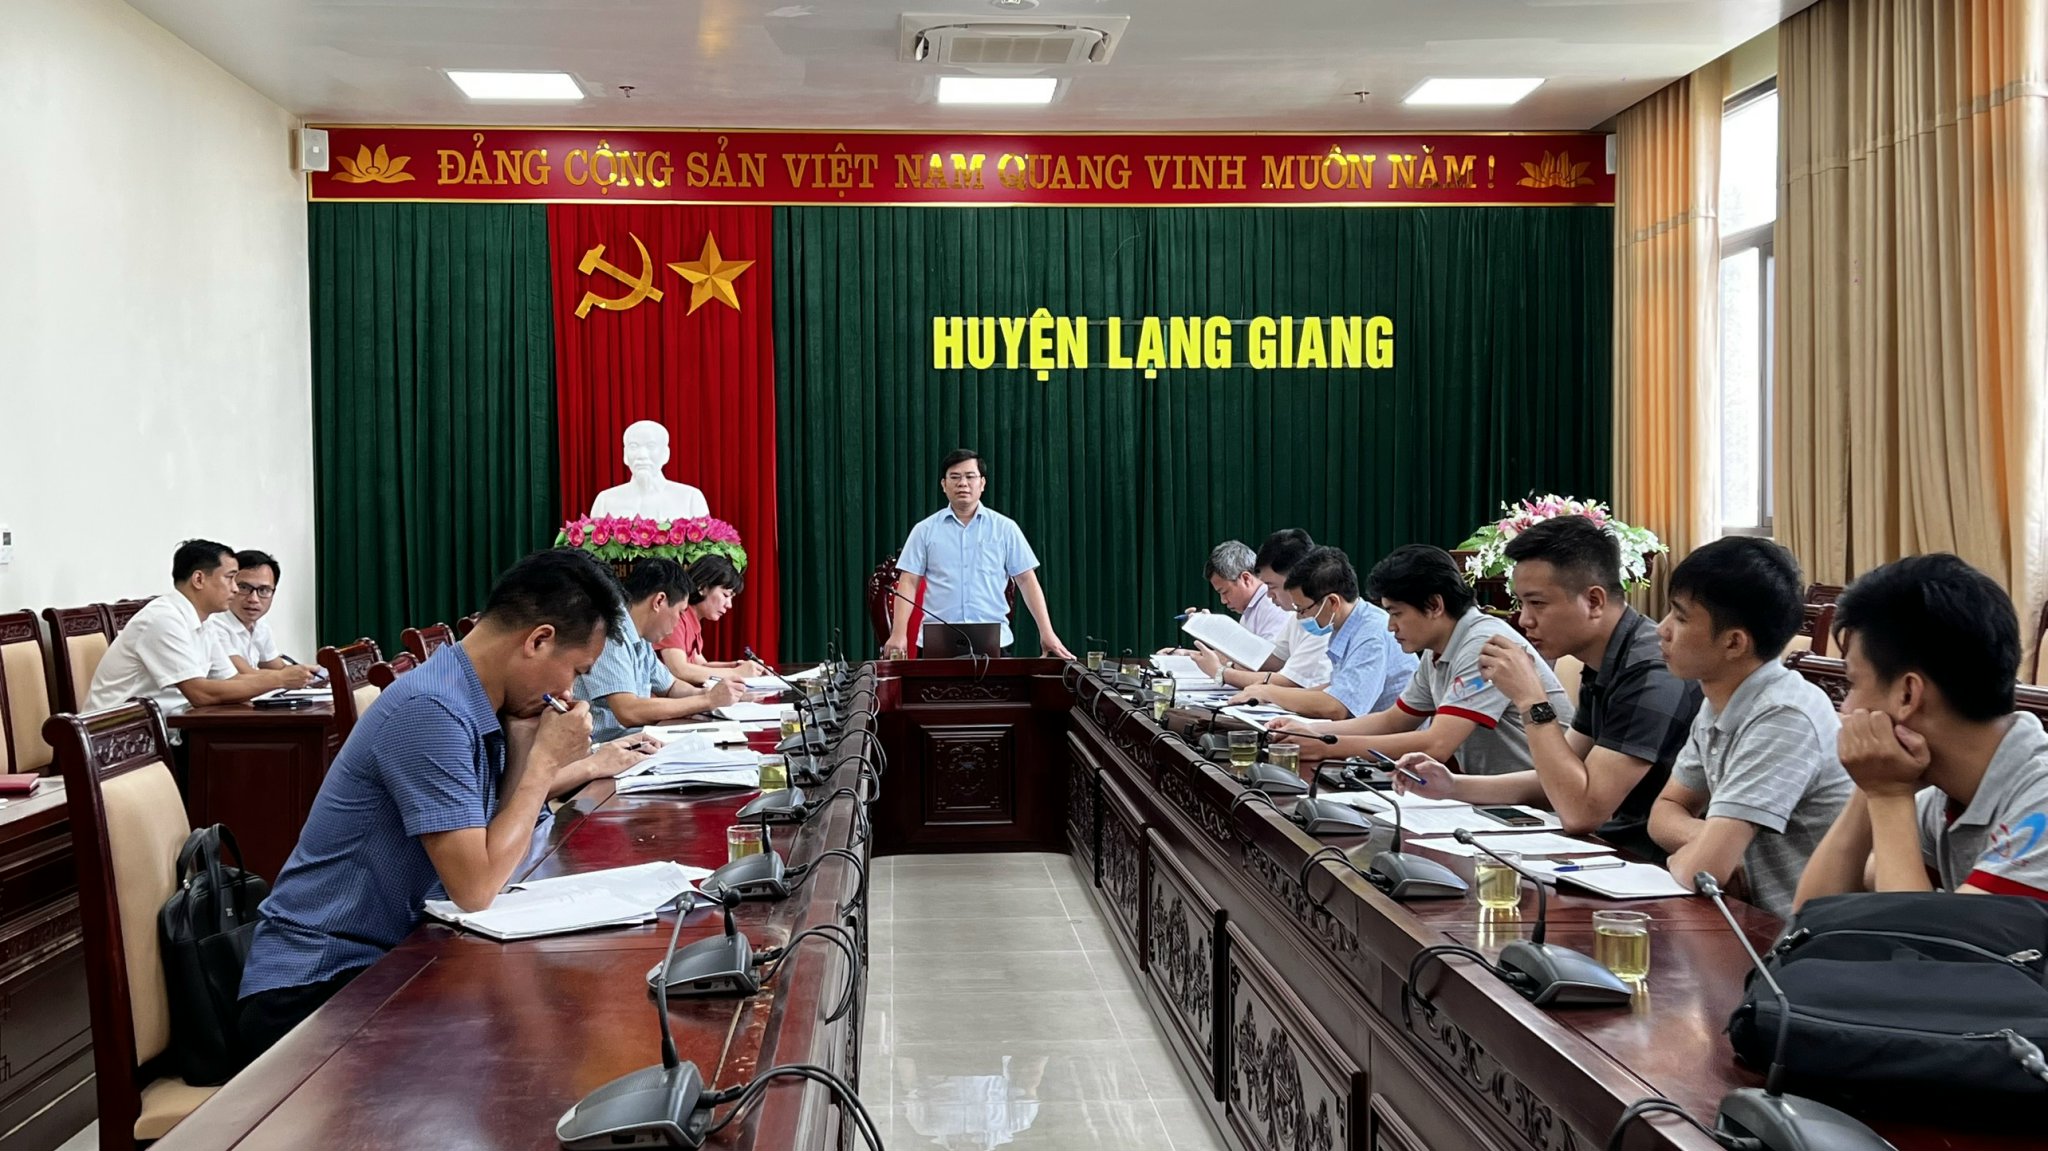 Bac Giang’s VILG Management Board inspects project implementation in the districts|https://stnmt.bacgiang.gov.vn/ja_JP/detailed-news/-/asset_publisher/u427aQT80iO6/content/bac-giang-s-vilg-management-board-inspects-project-implementation-in-the-districts